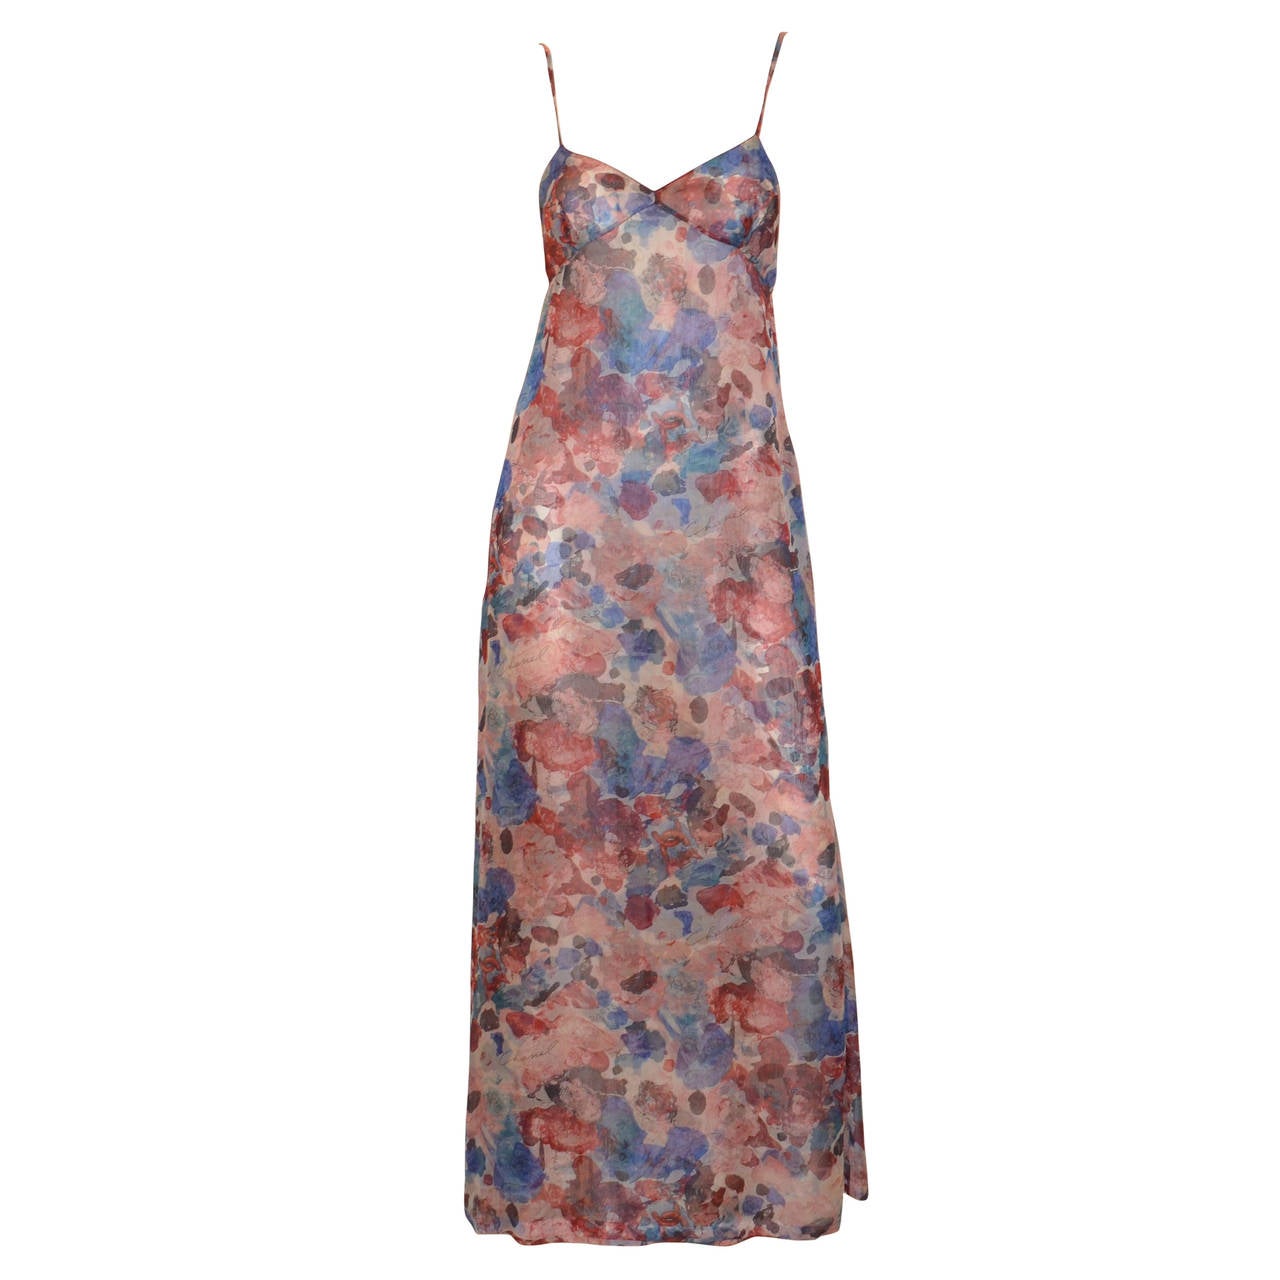 Chanel 1999 Cruise Collection Floral Silk Dress Slip Maxi Gown at 1stdibs